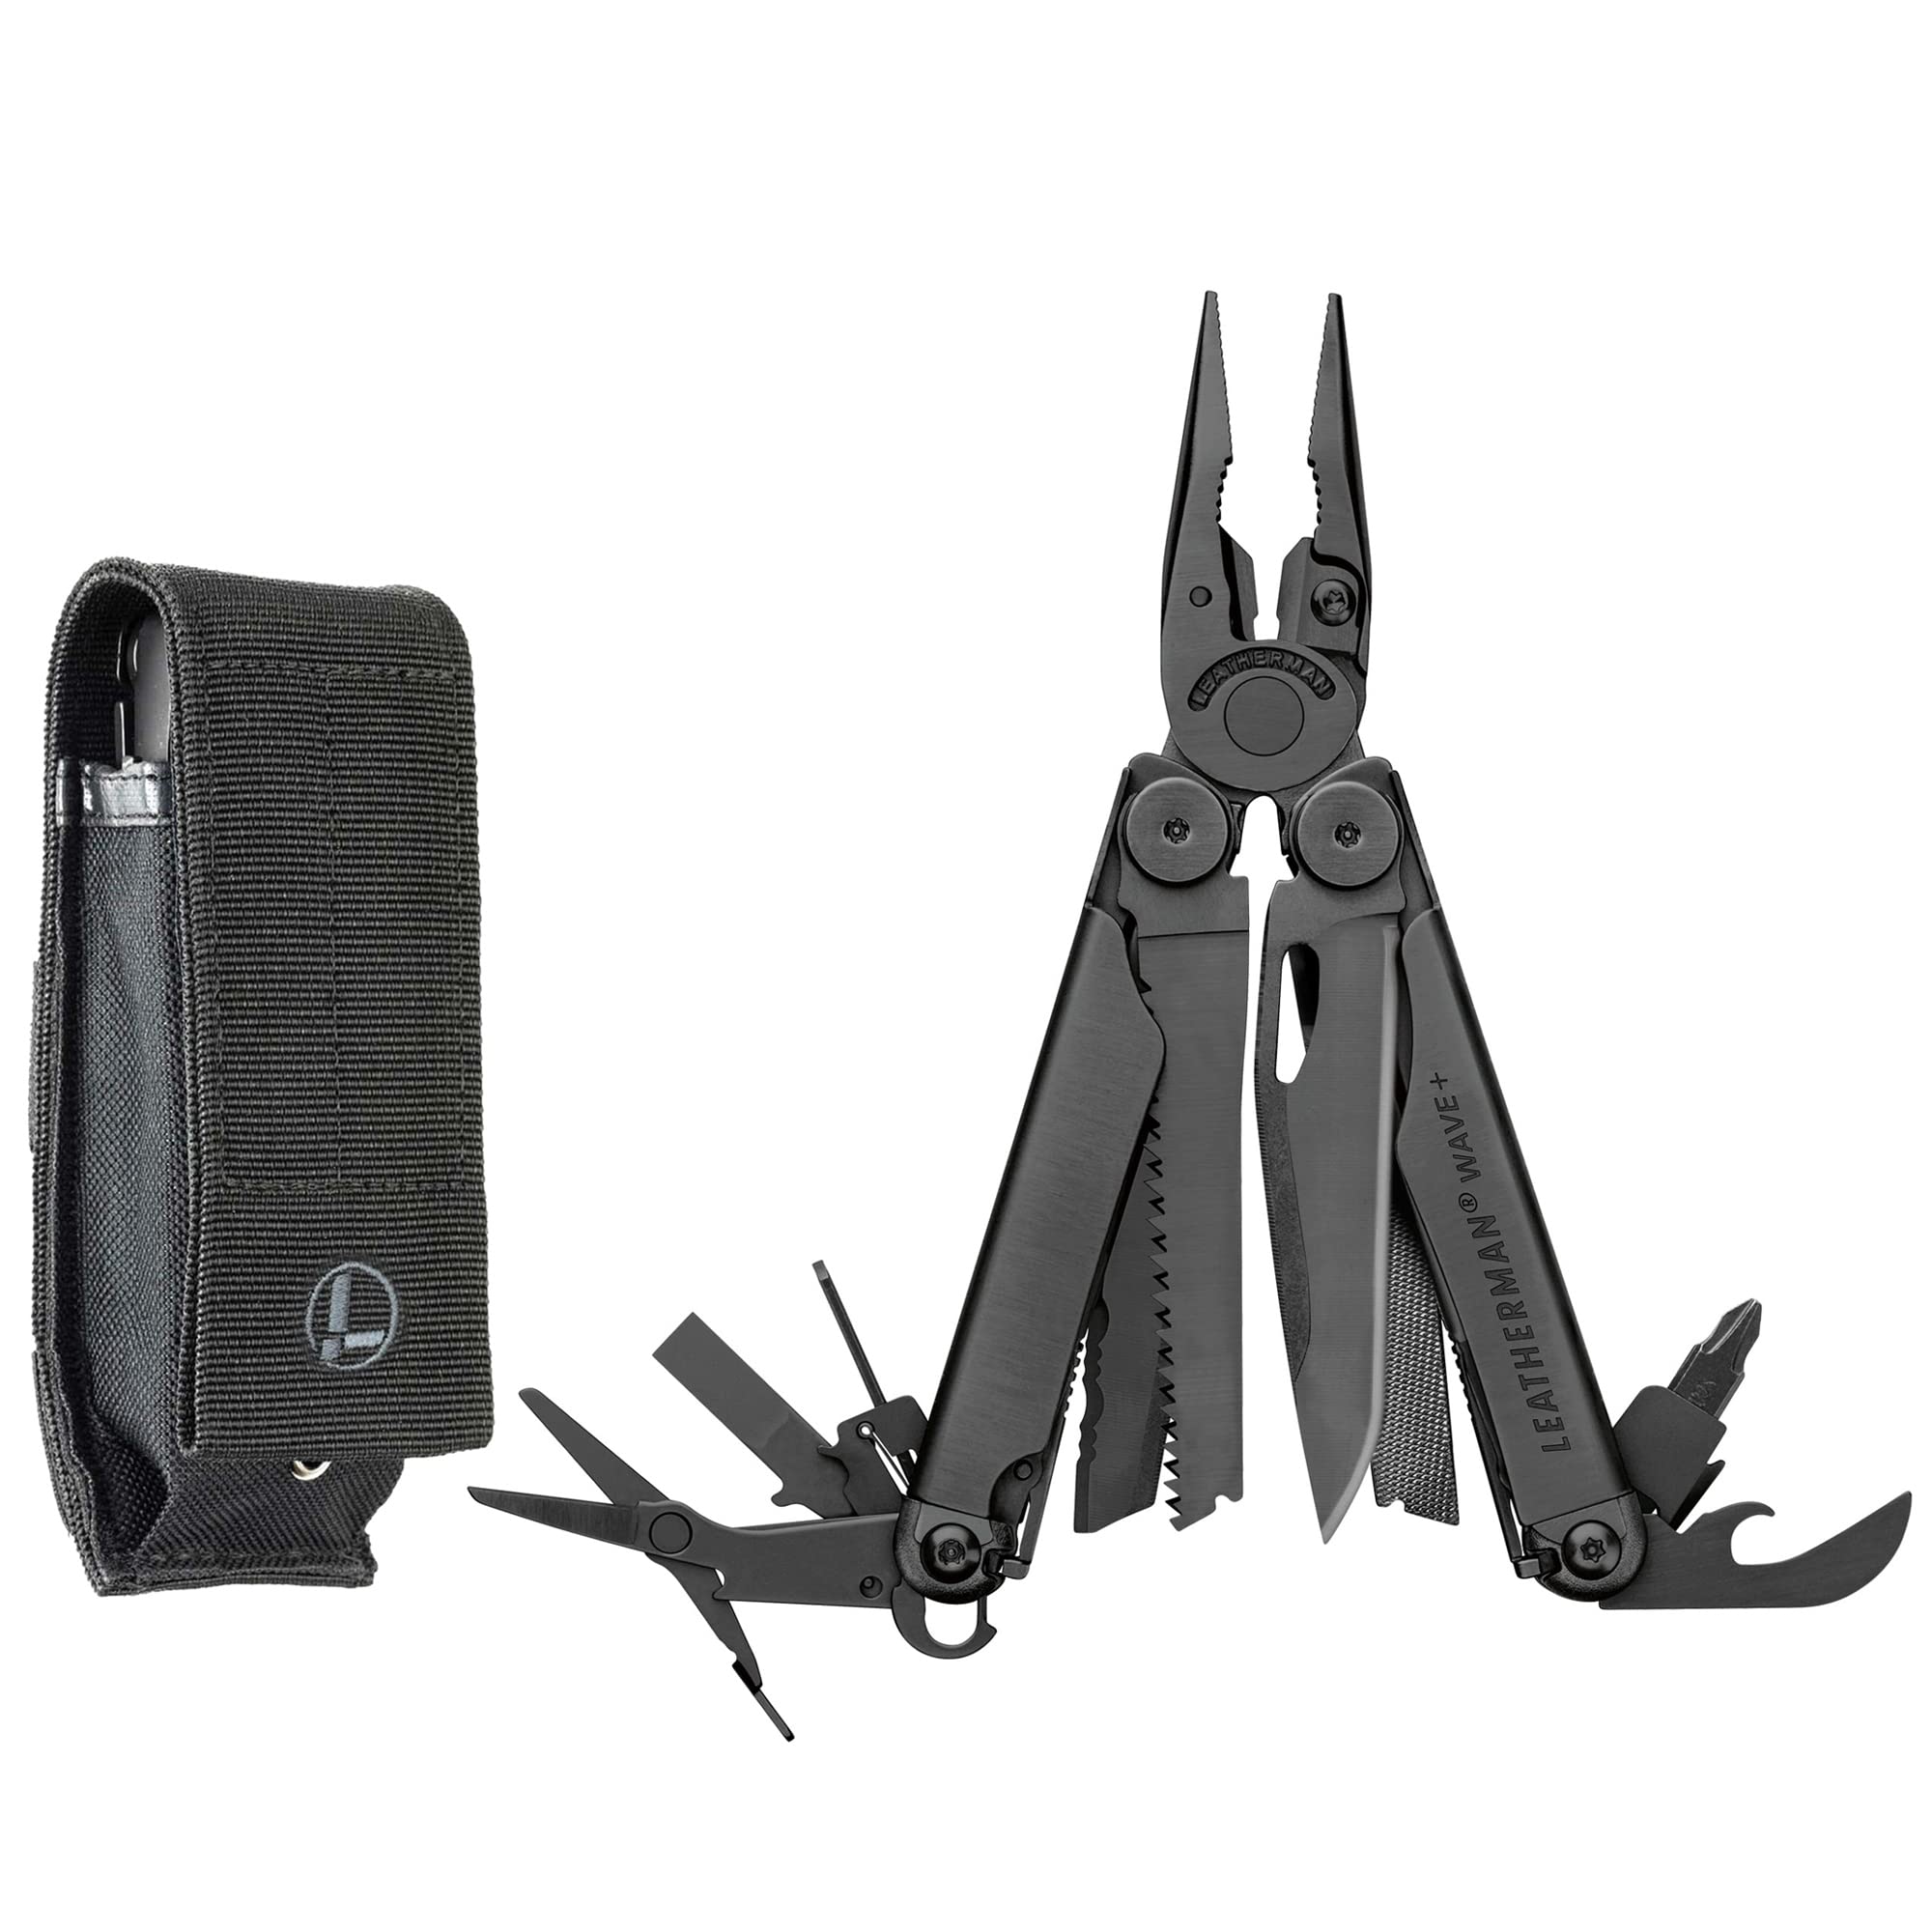 Leatherman - Wave Plus Multitool with Premium Replaceable Wire Cutters, Spring-Action Scissors and Nylon Sheath, Built in the USA